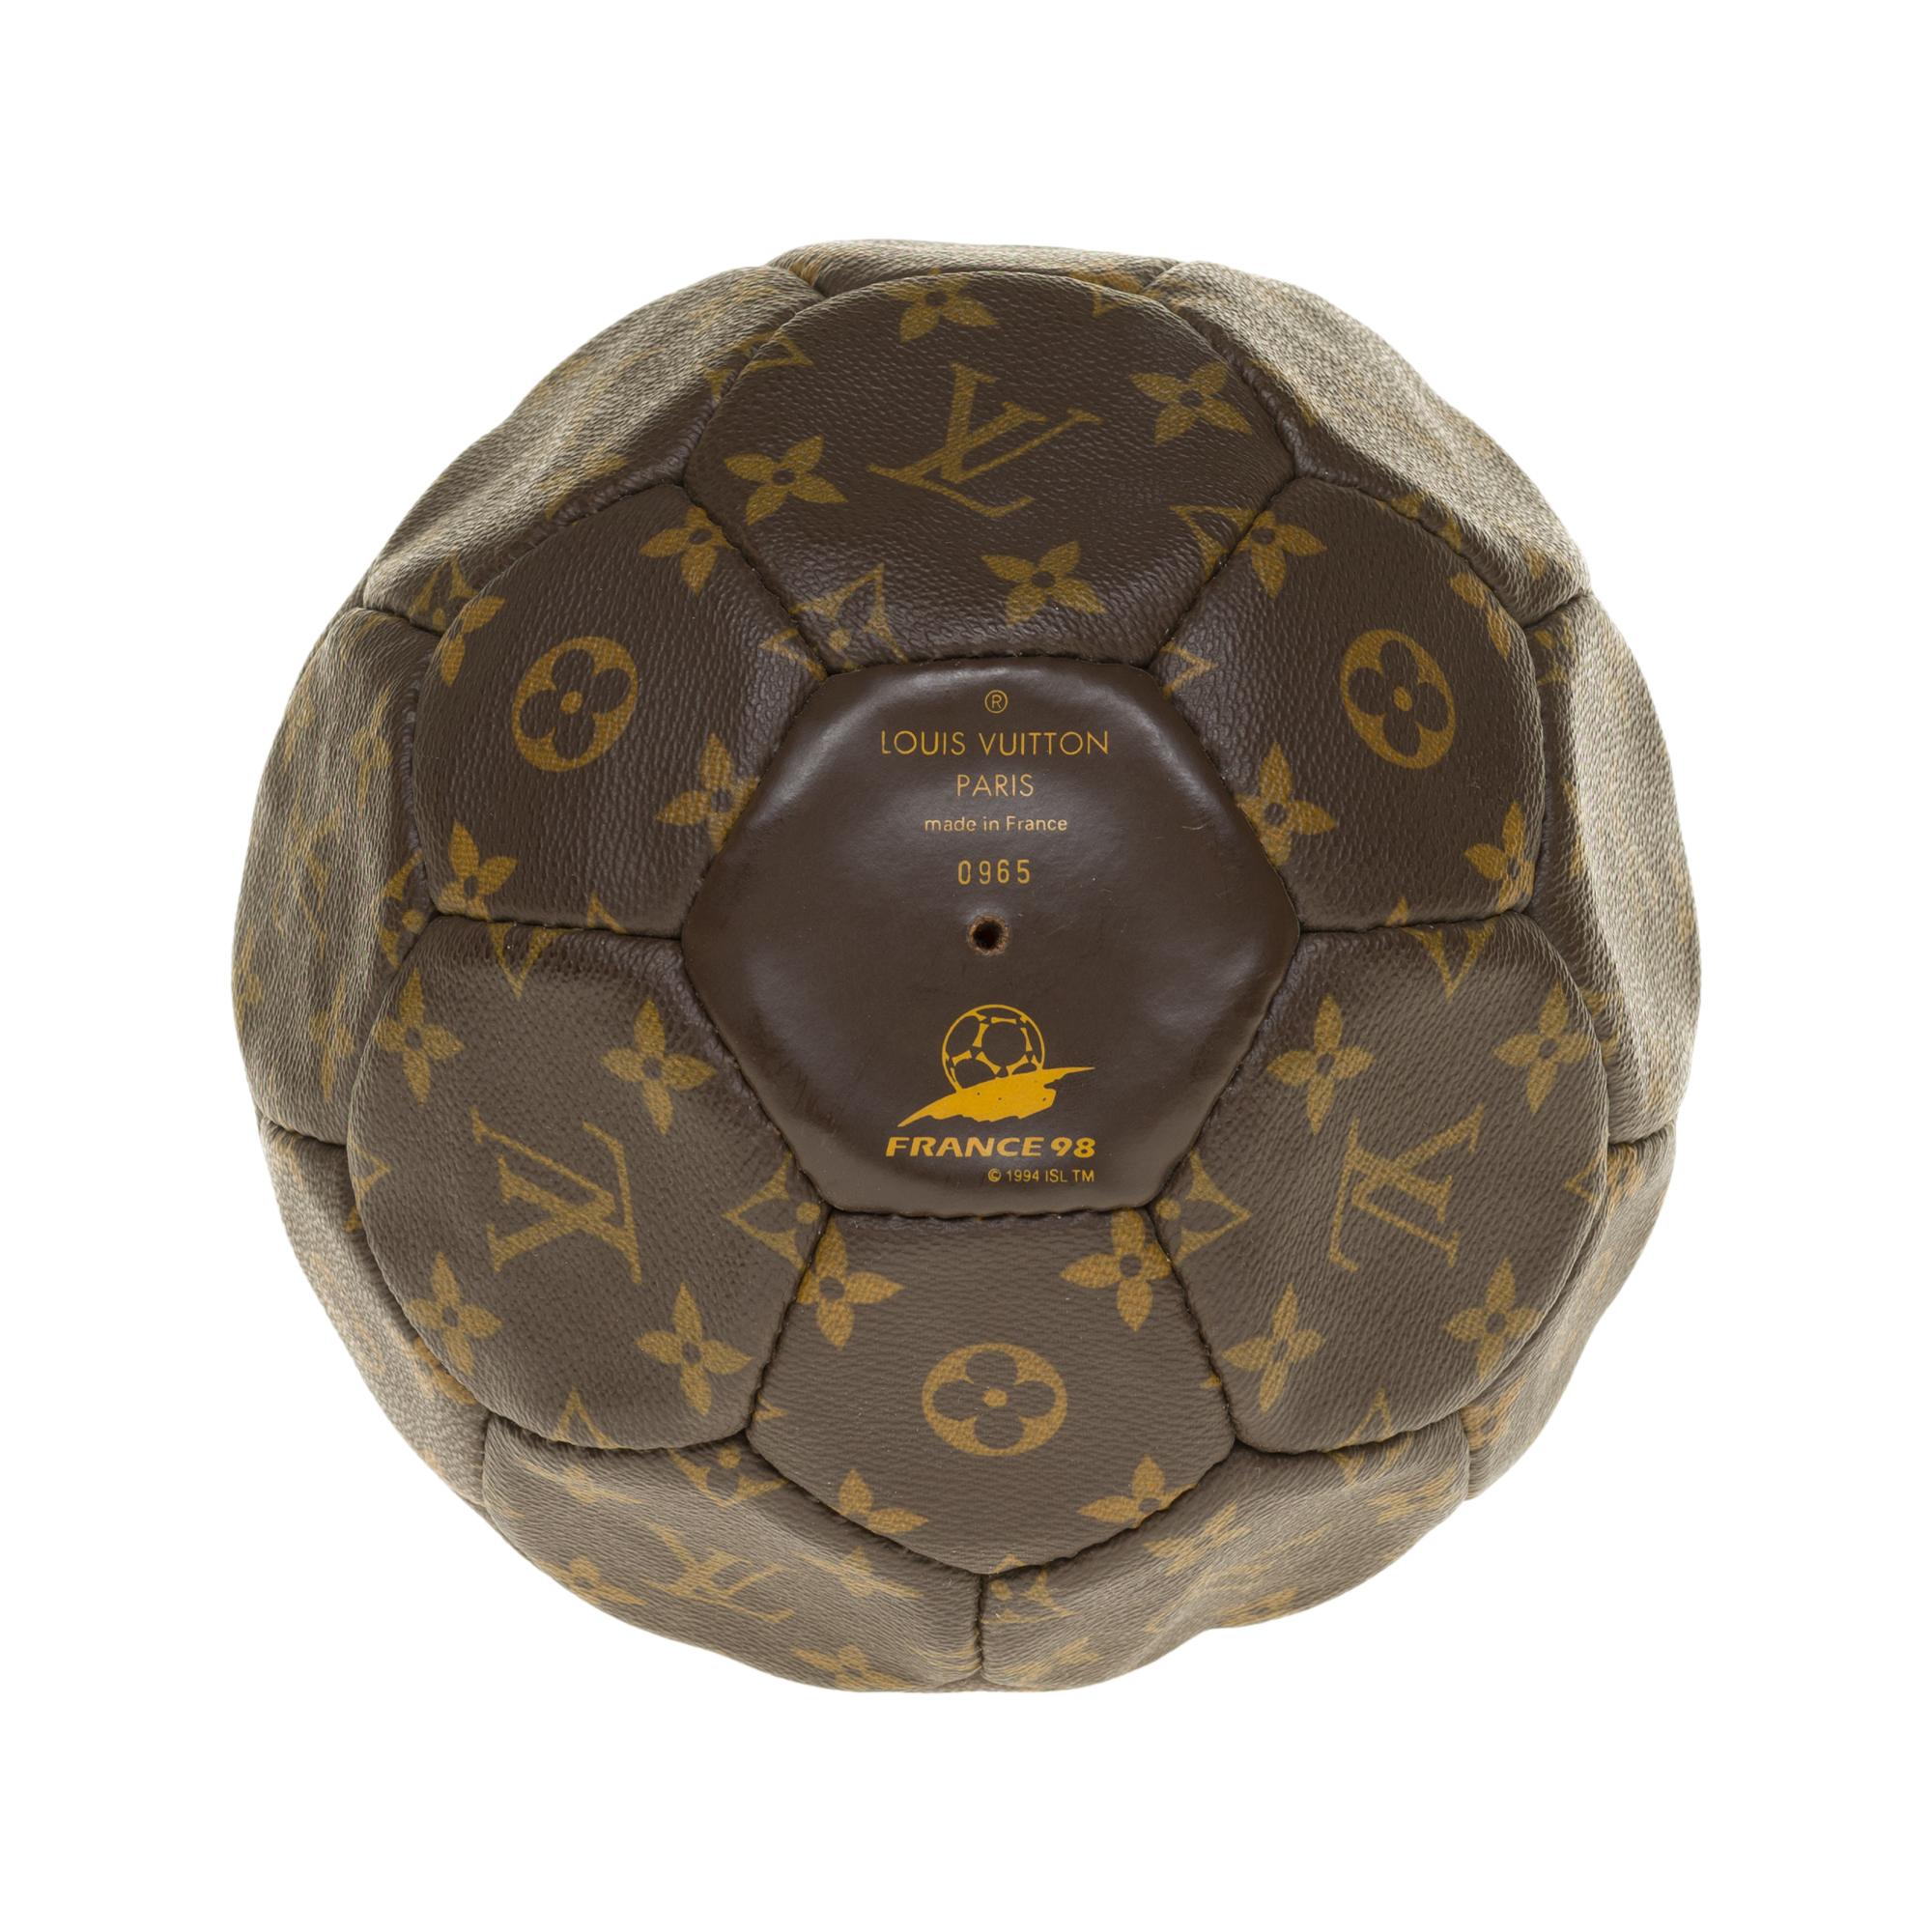 Collectible Louis Vuitton ball World Cup 98 in brown canvas and natural leather 4